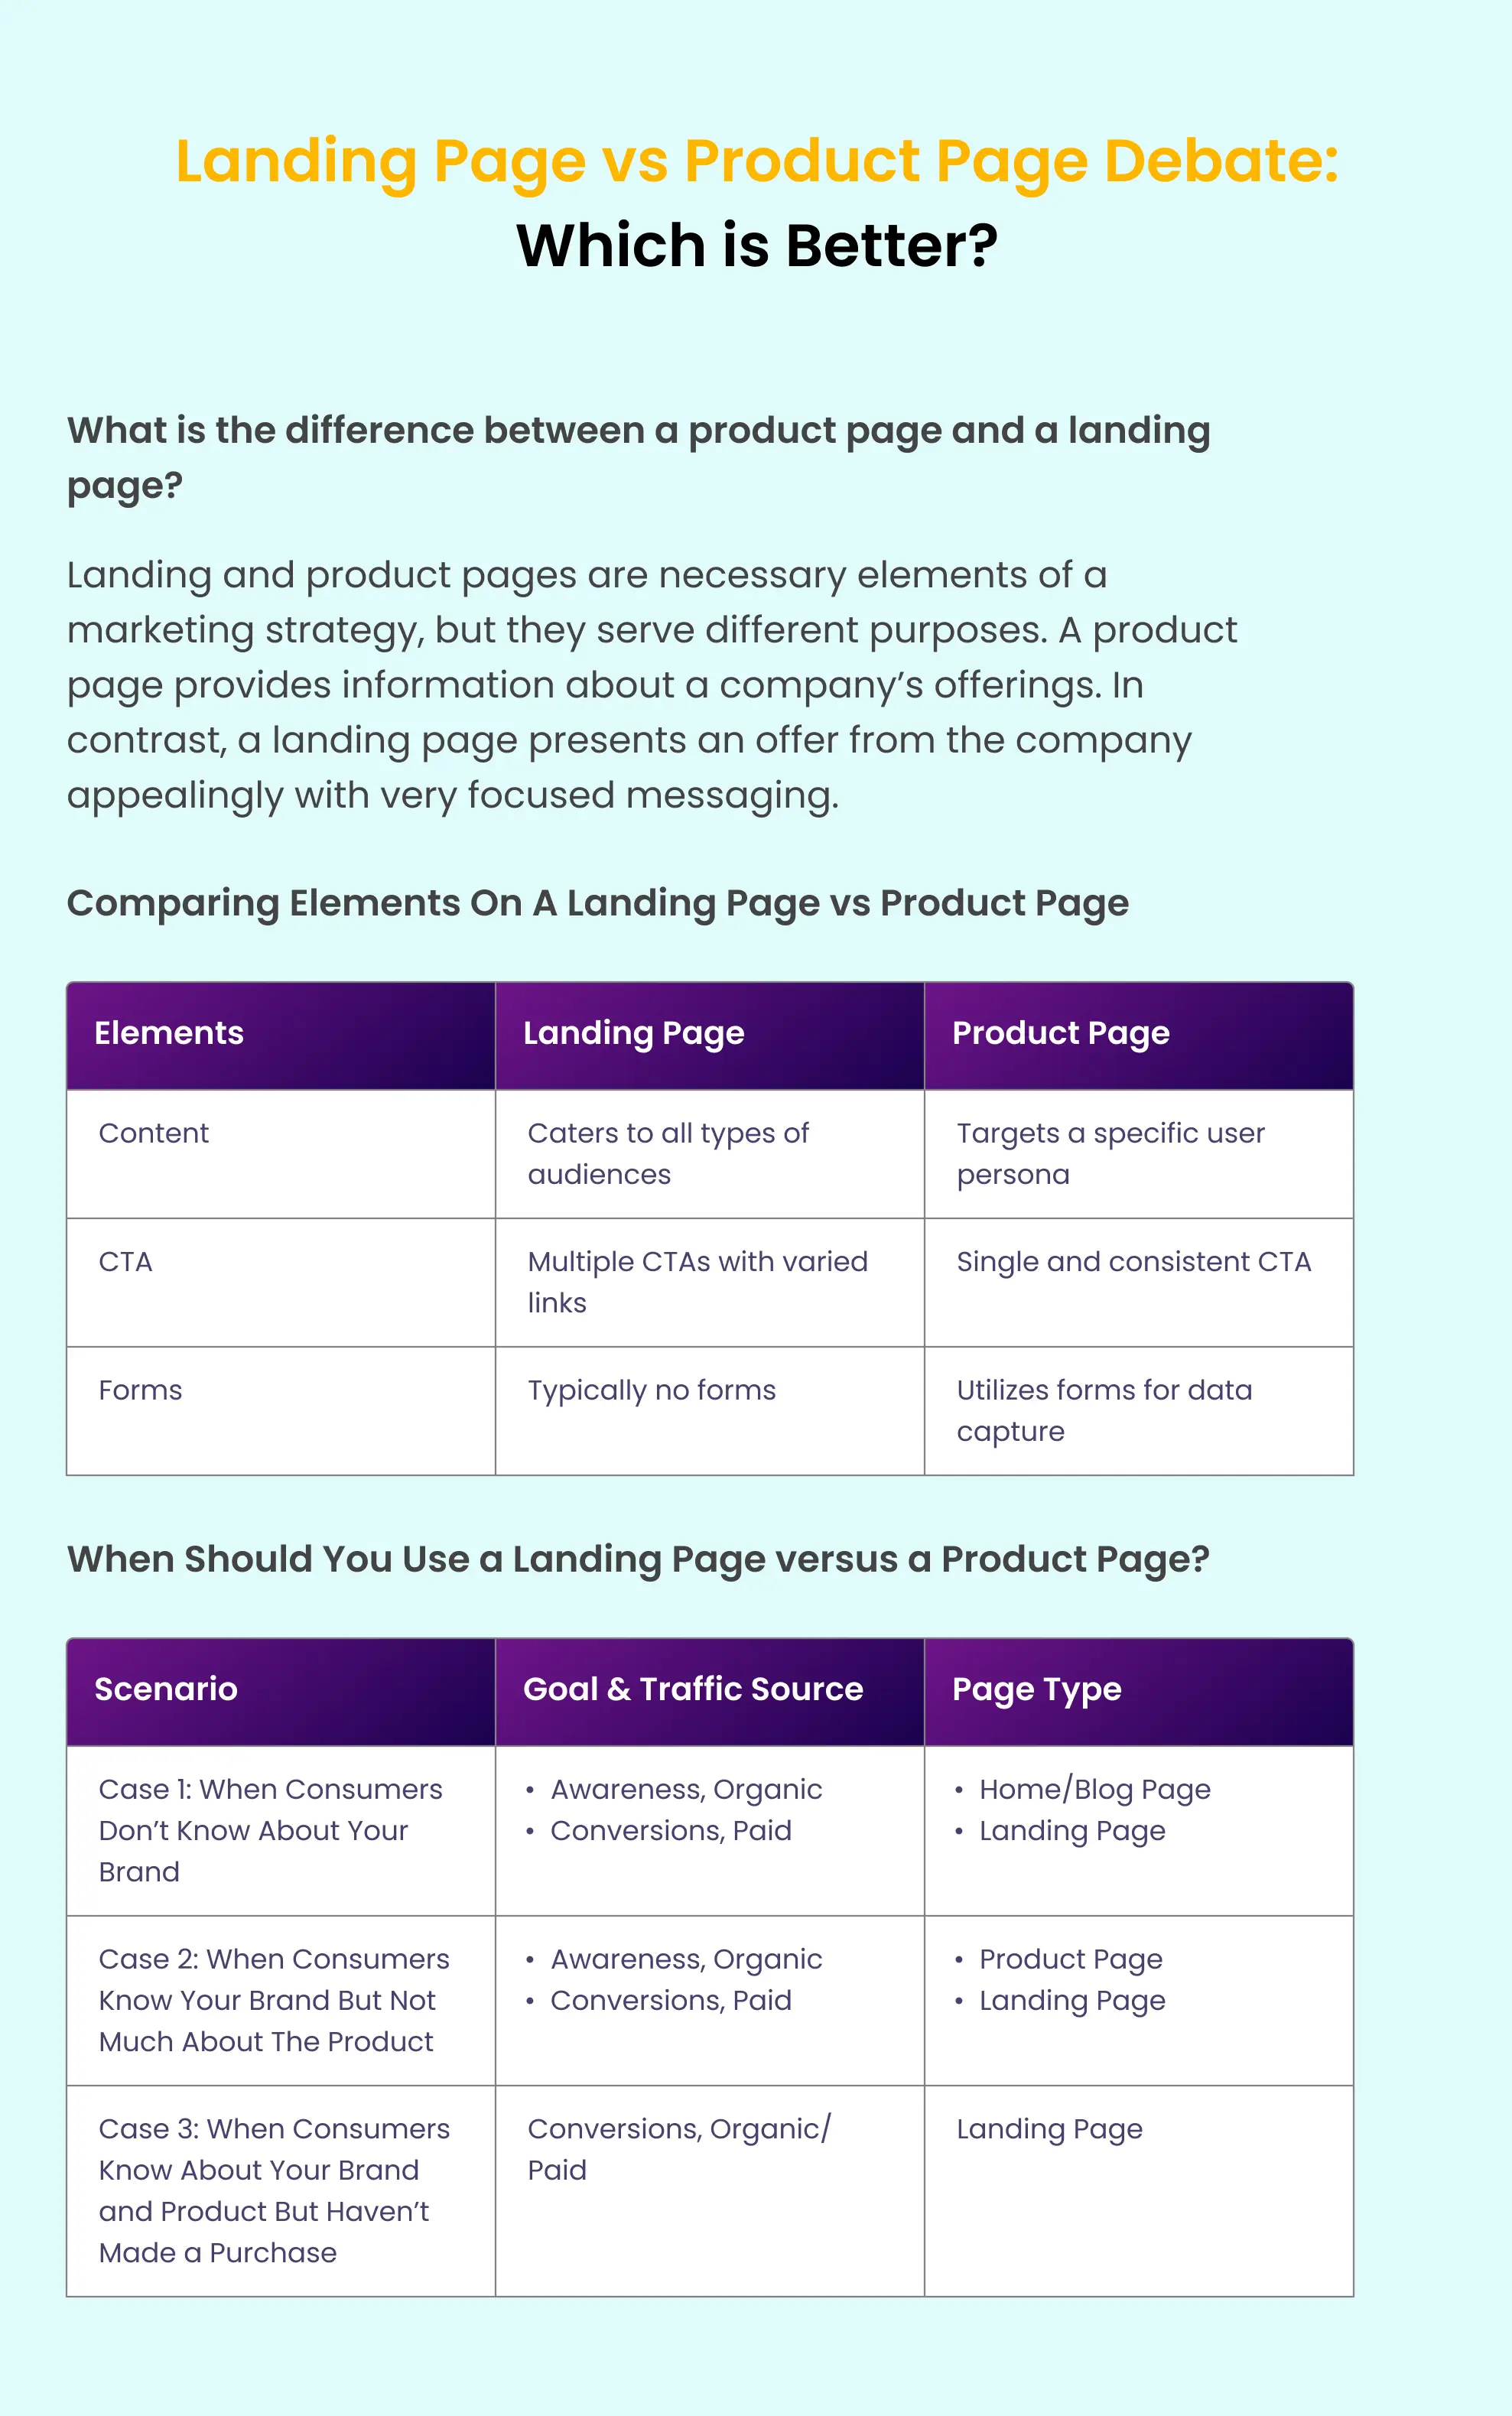 landing-page-vs-product-page-summary.webp